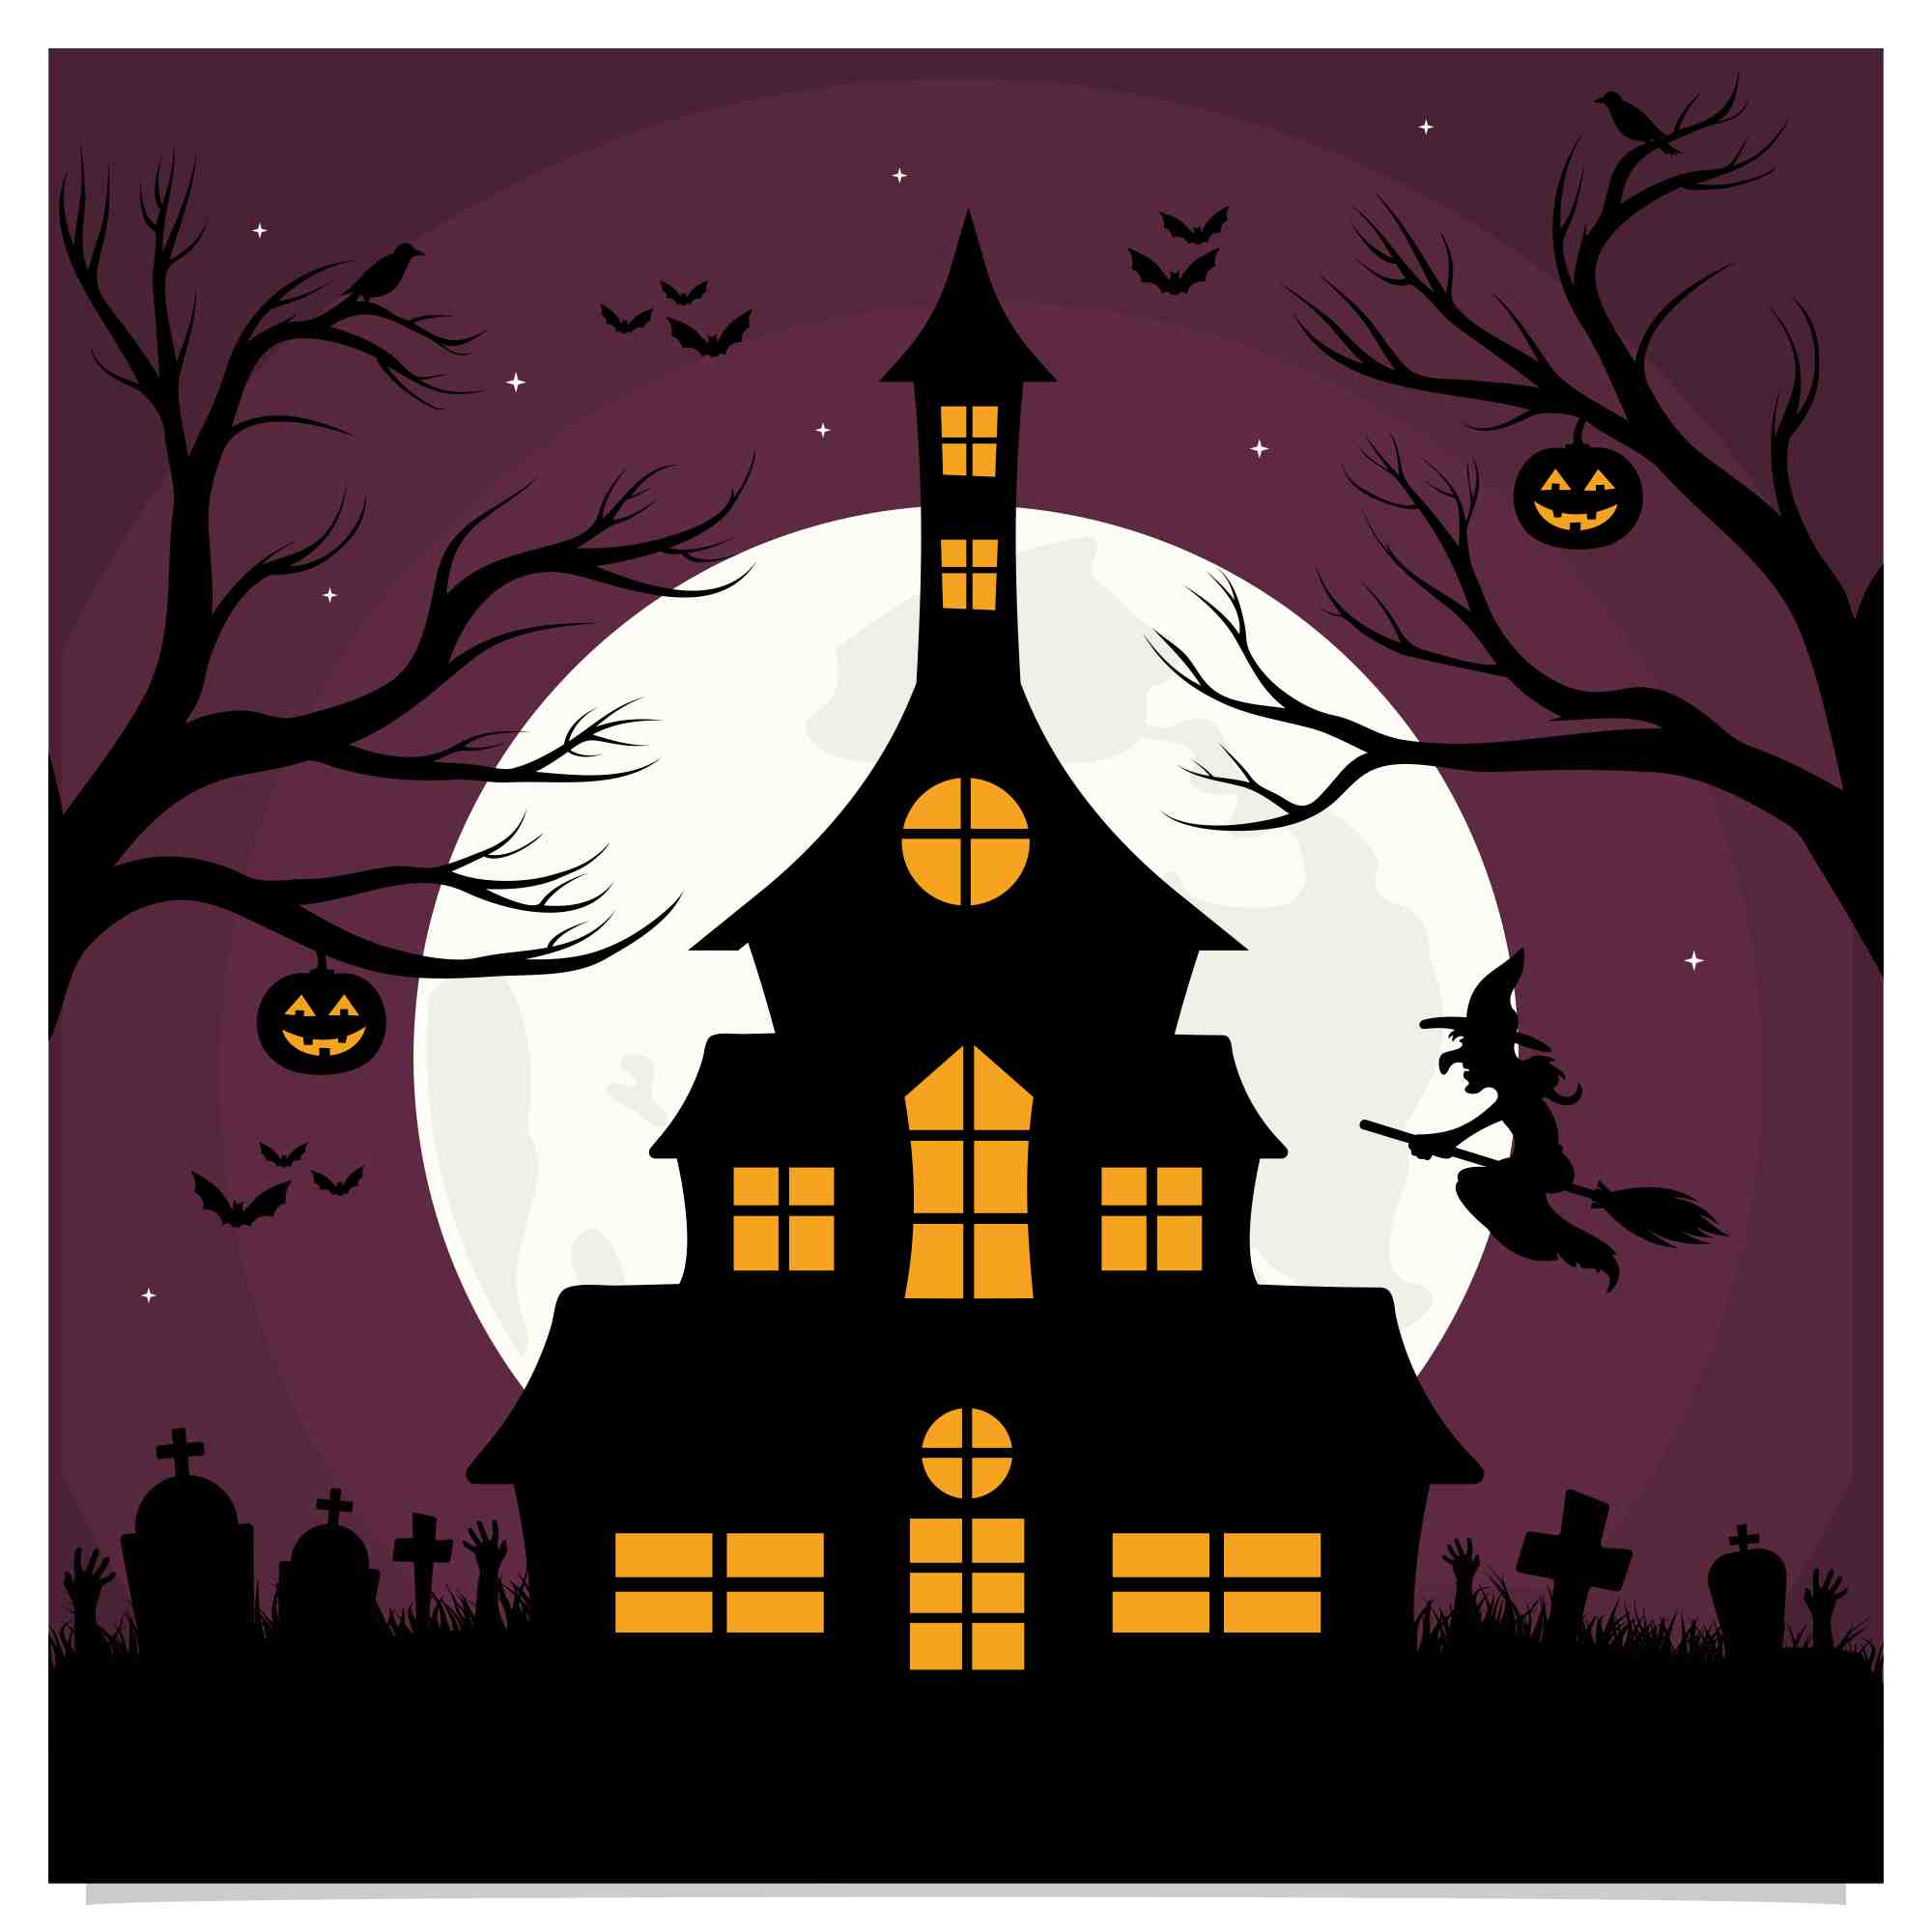 set Happy Halloween background design collection - $4 preview image.